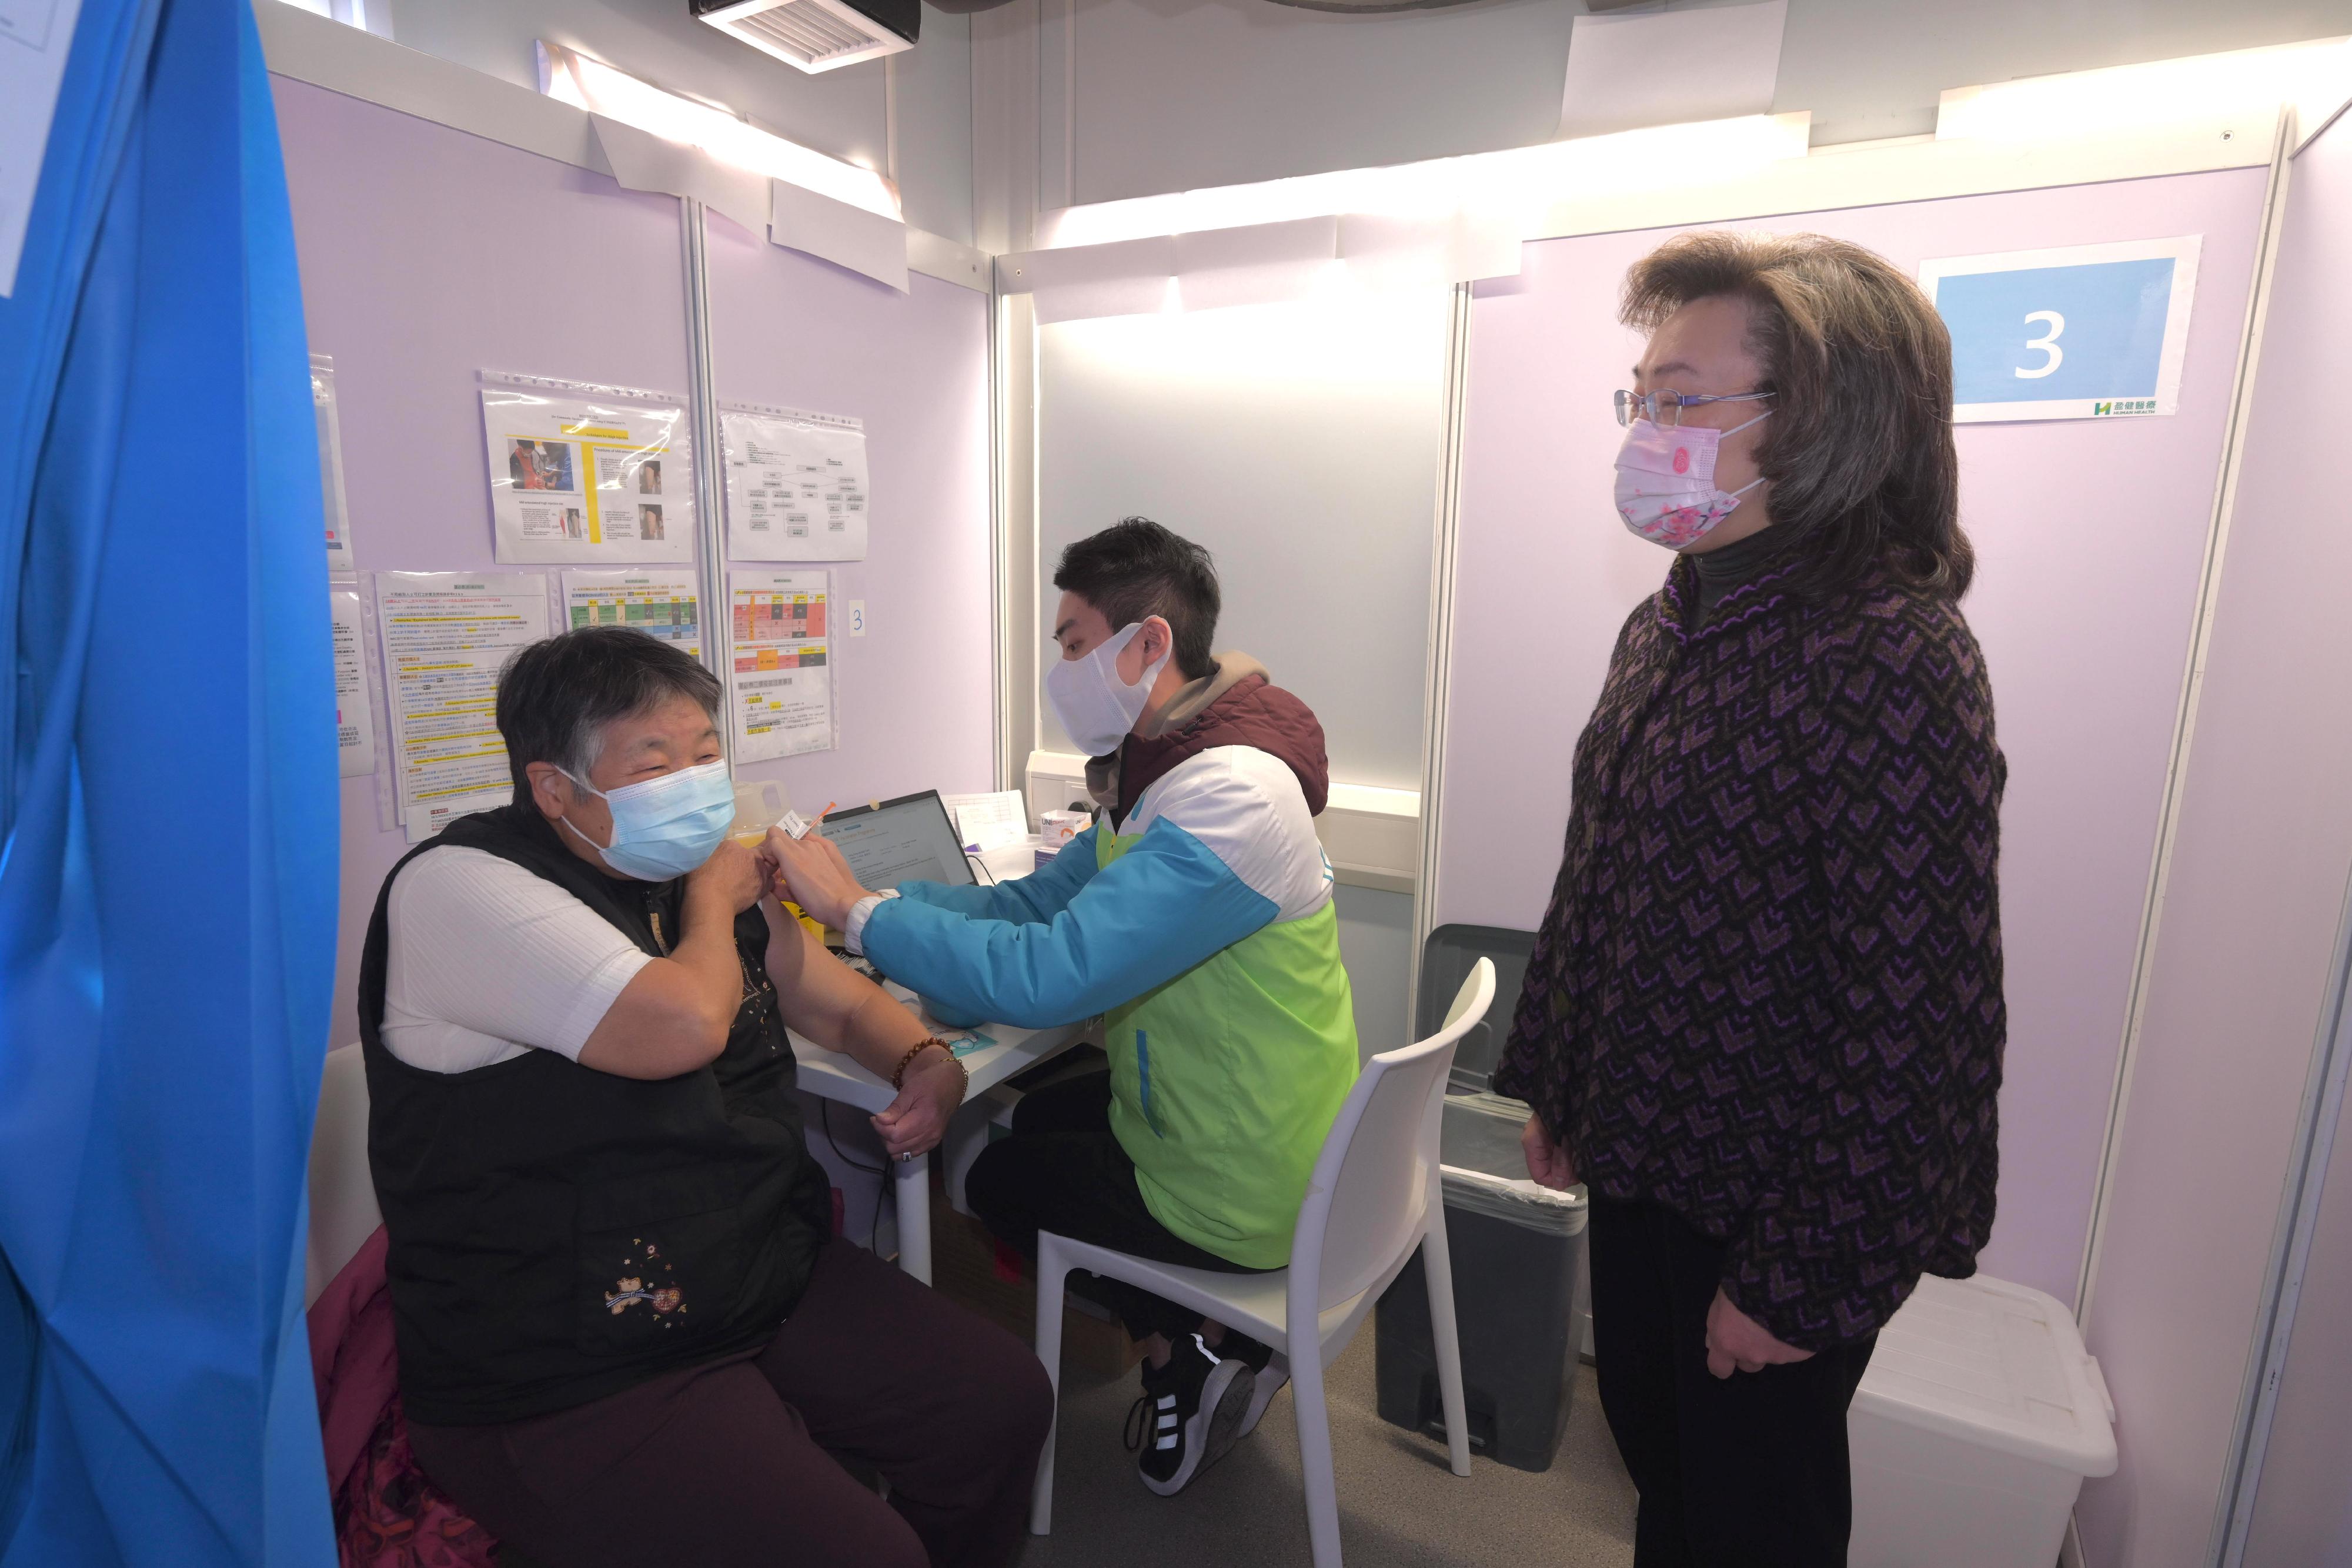 The Secretary for the Civil Service, Mrs Ingrid Yeung, visited the Yuen Long Community Vaccination Station located at the open space outside the Yuen Long Leisure and Cultural Building today (January 30) to see for herself the vaccination situation. Photos shows Mrs Yeung (right) with an elderly person in her 70s who is receiving the fourth dose of COVID-19 vaccine.